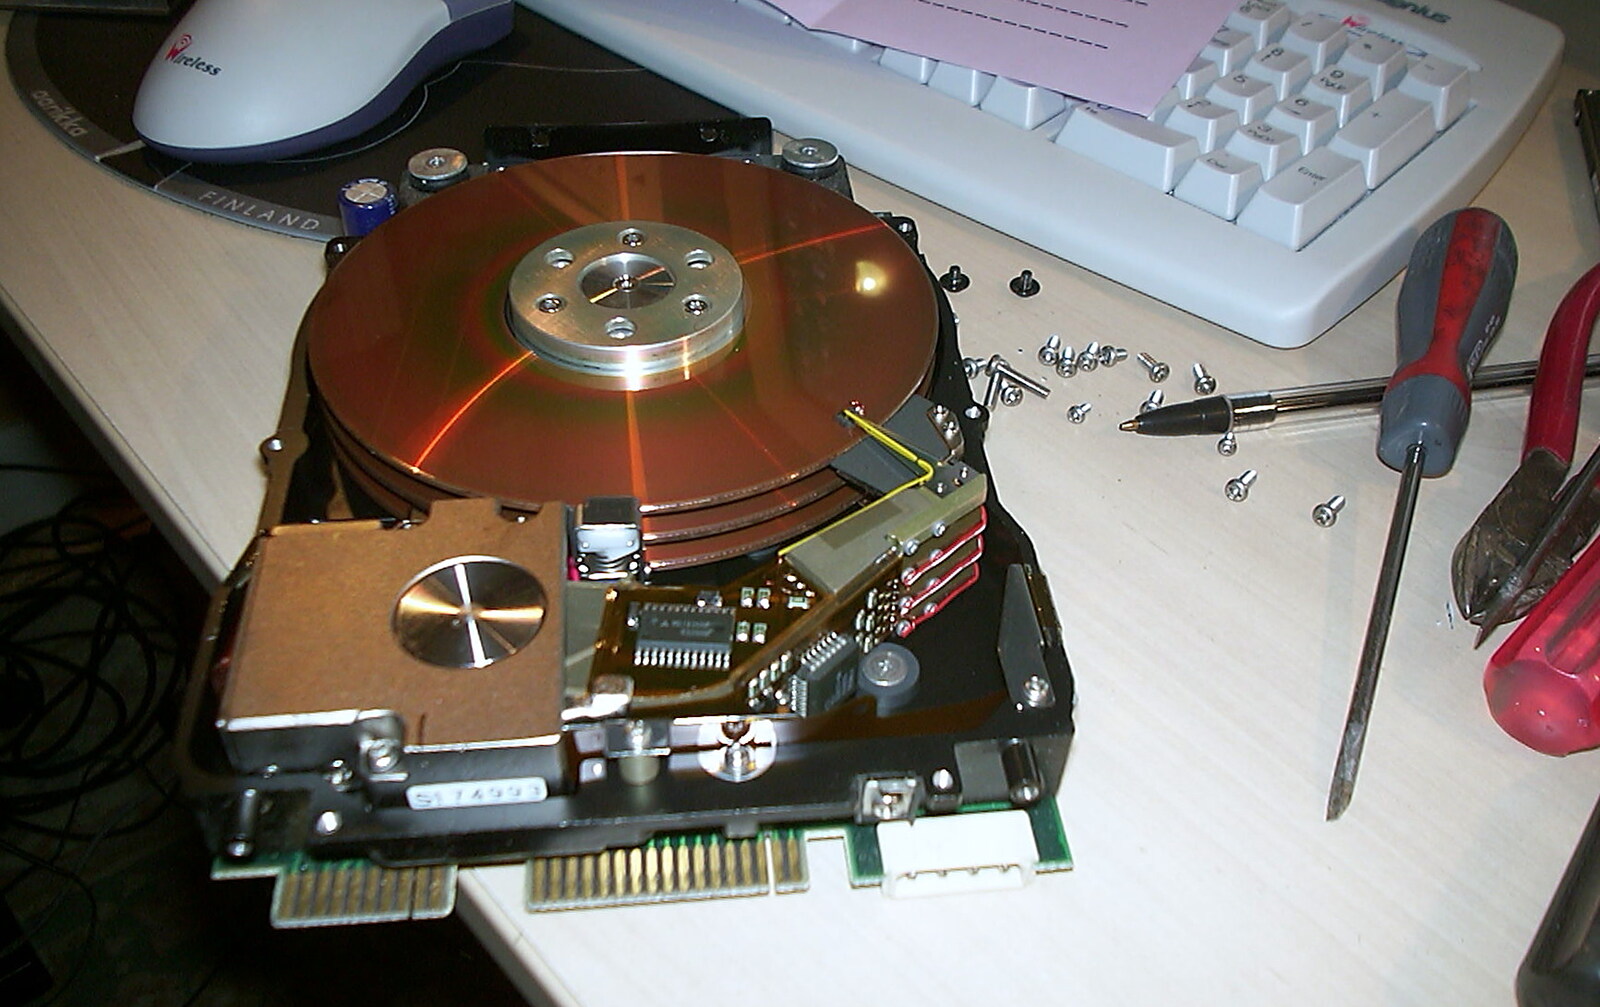 Three platters on an RLL hard disk from A Hard-Drive Clock and Other Projects, Brome, Suffolk - 28th June 2002